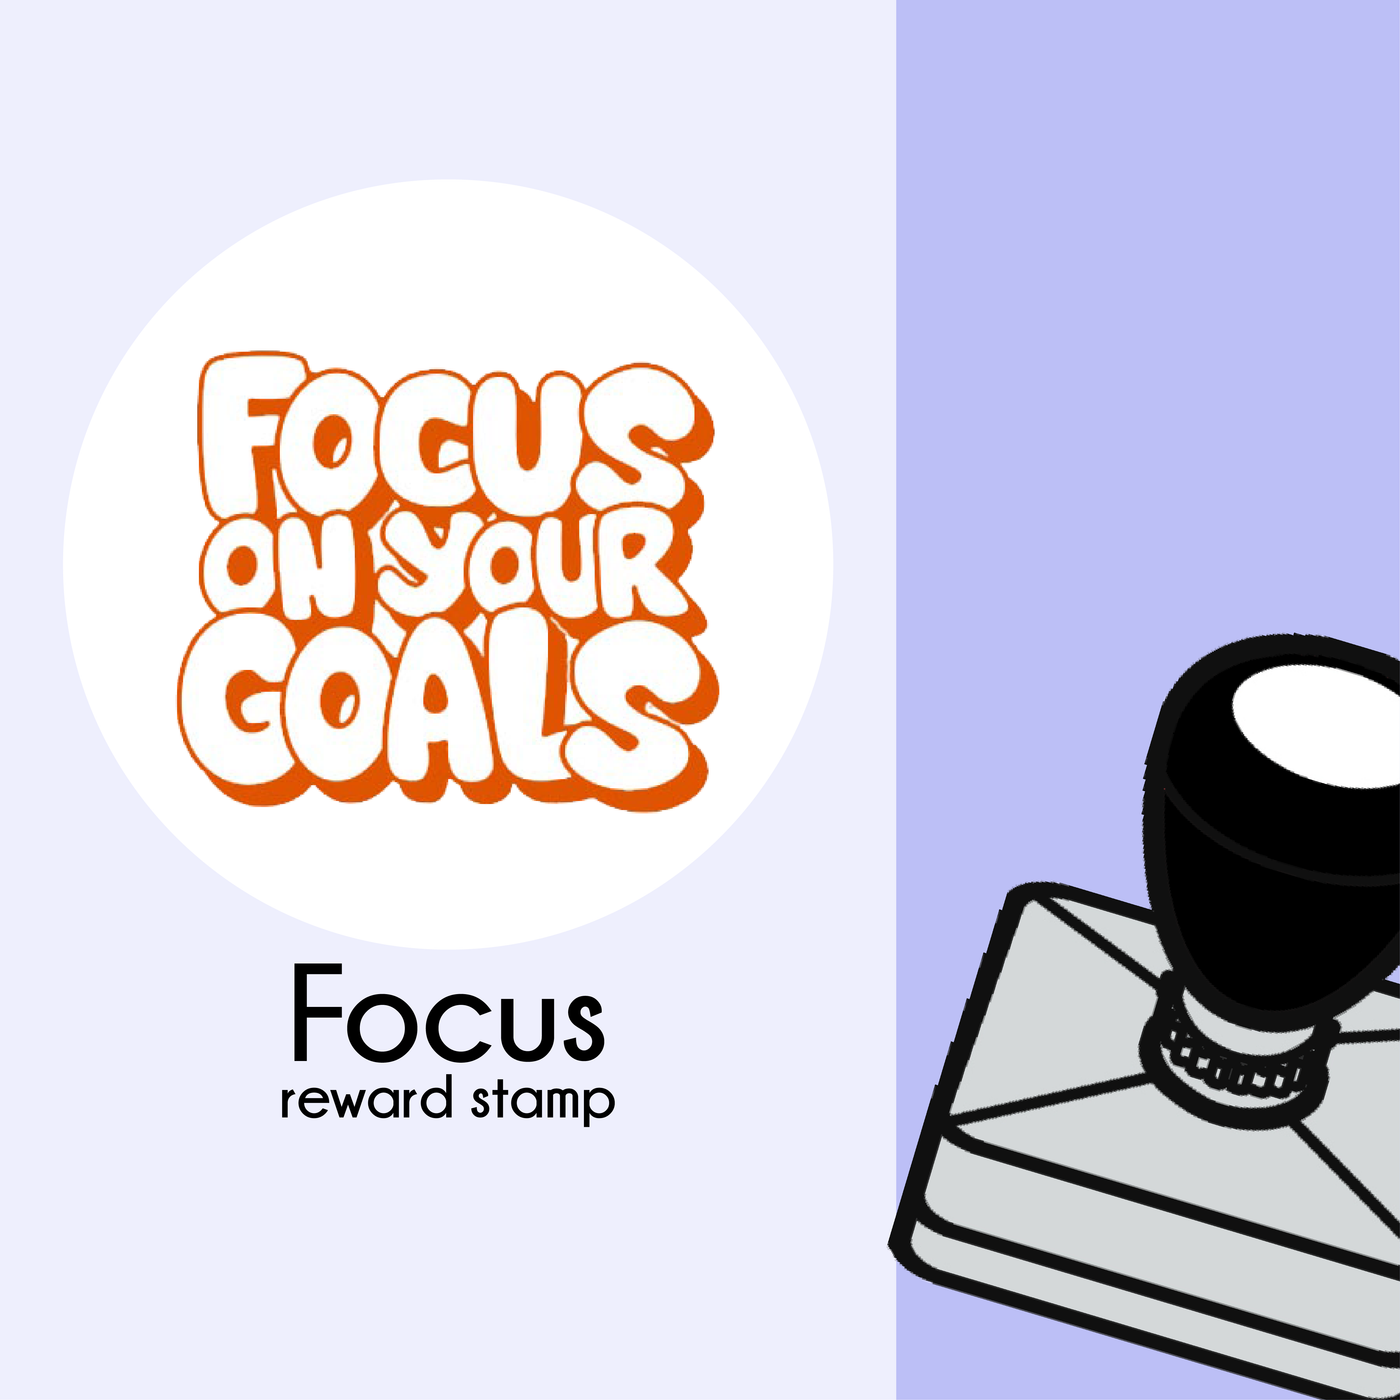 Teacher Stamp - Focus on your goal - Mindset - StickyBoo Stickers and Stamps